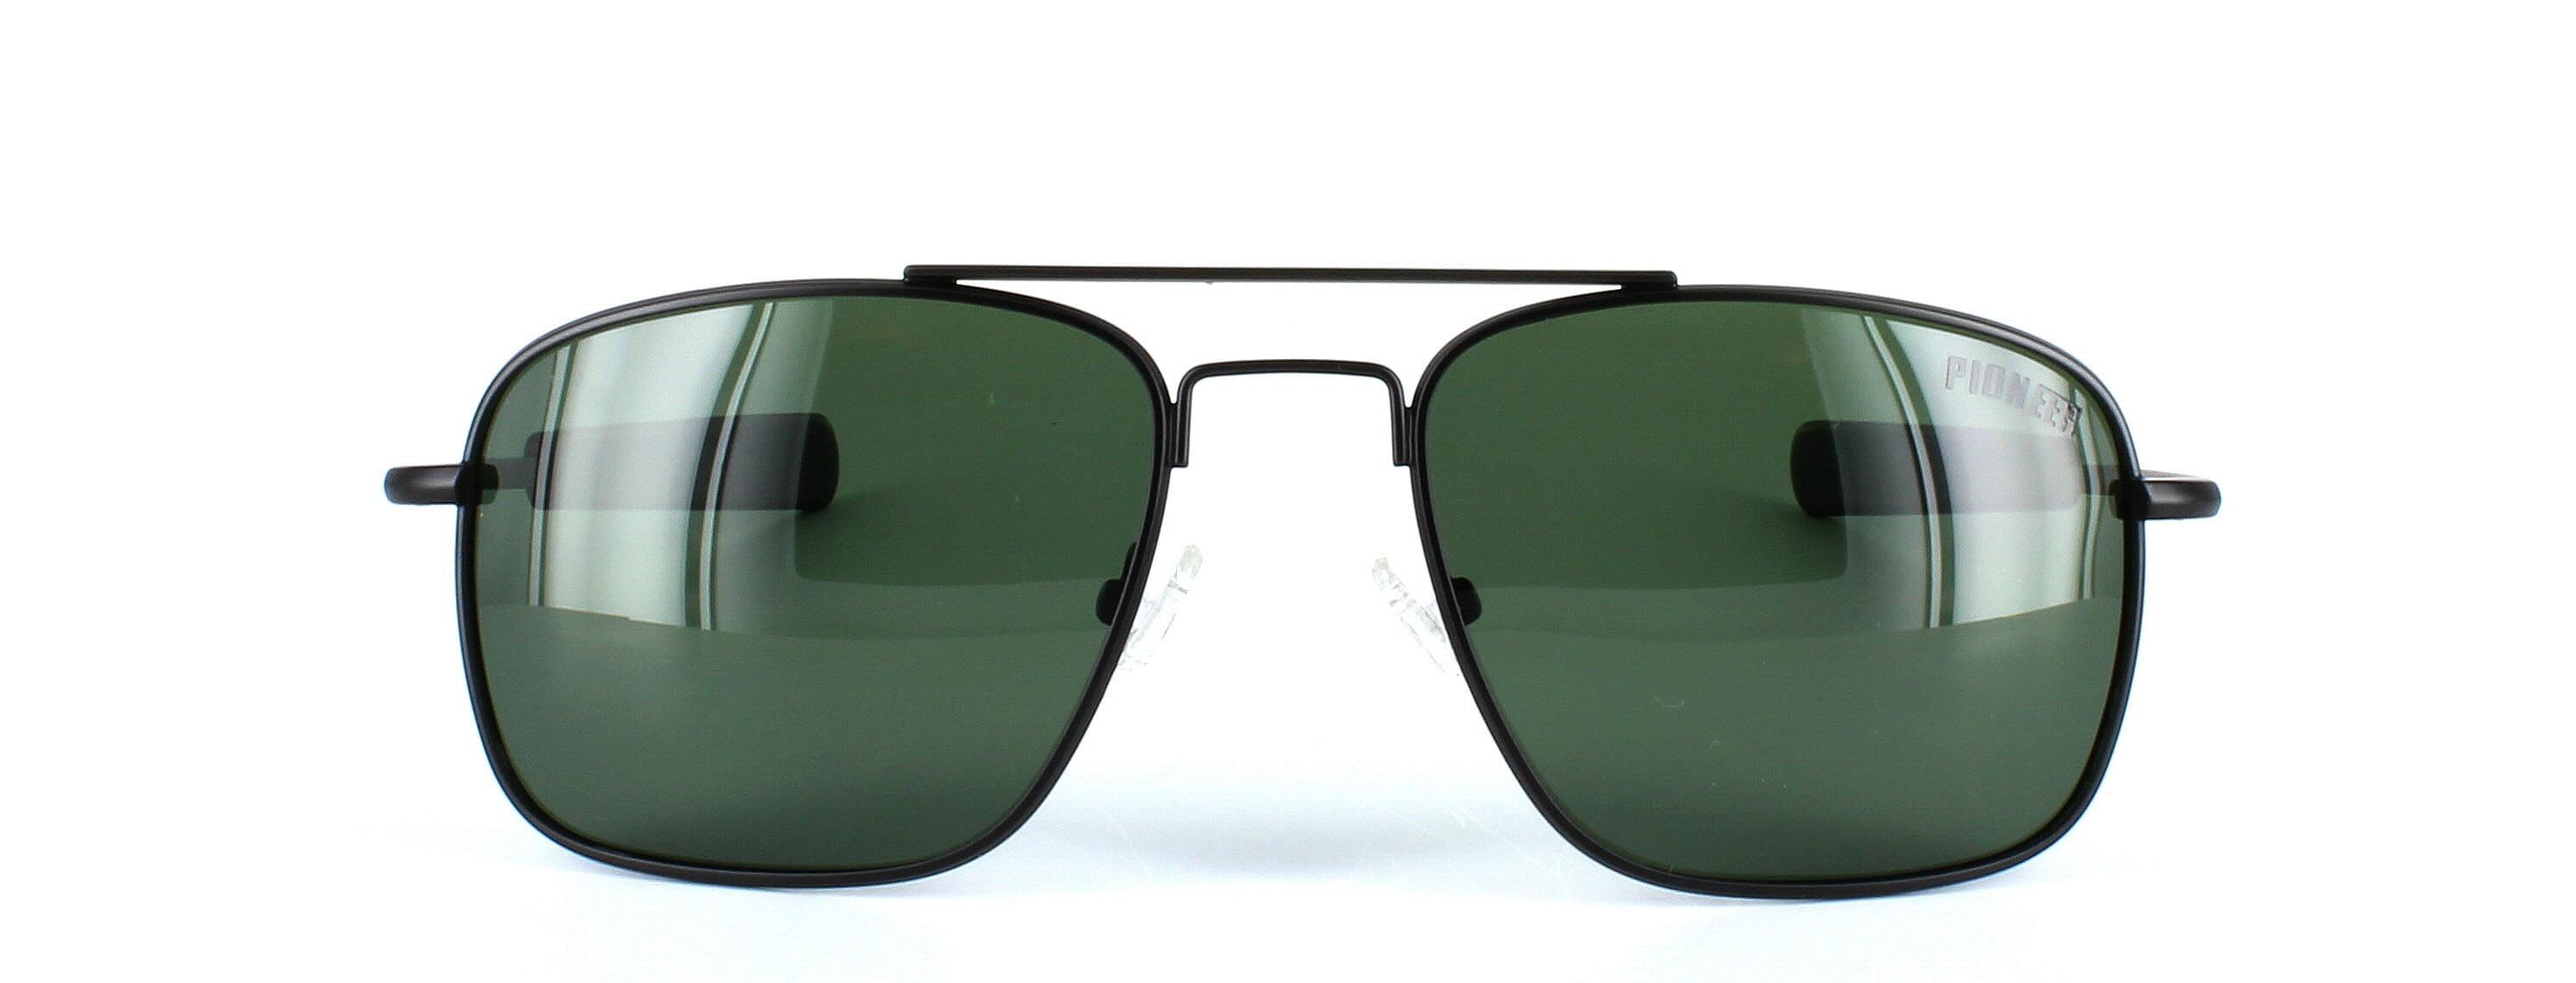 Tommaso - Gent's aviator style prescription sunglasses in black - choose green, brown or grey tints inc in the price - image view 5